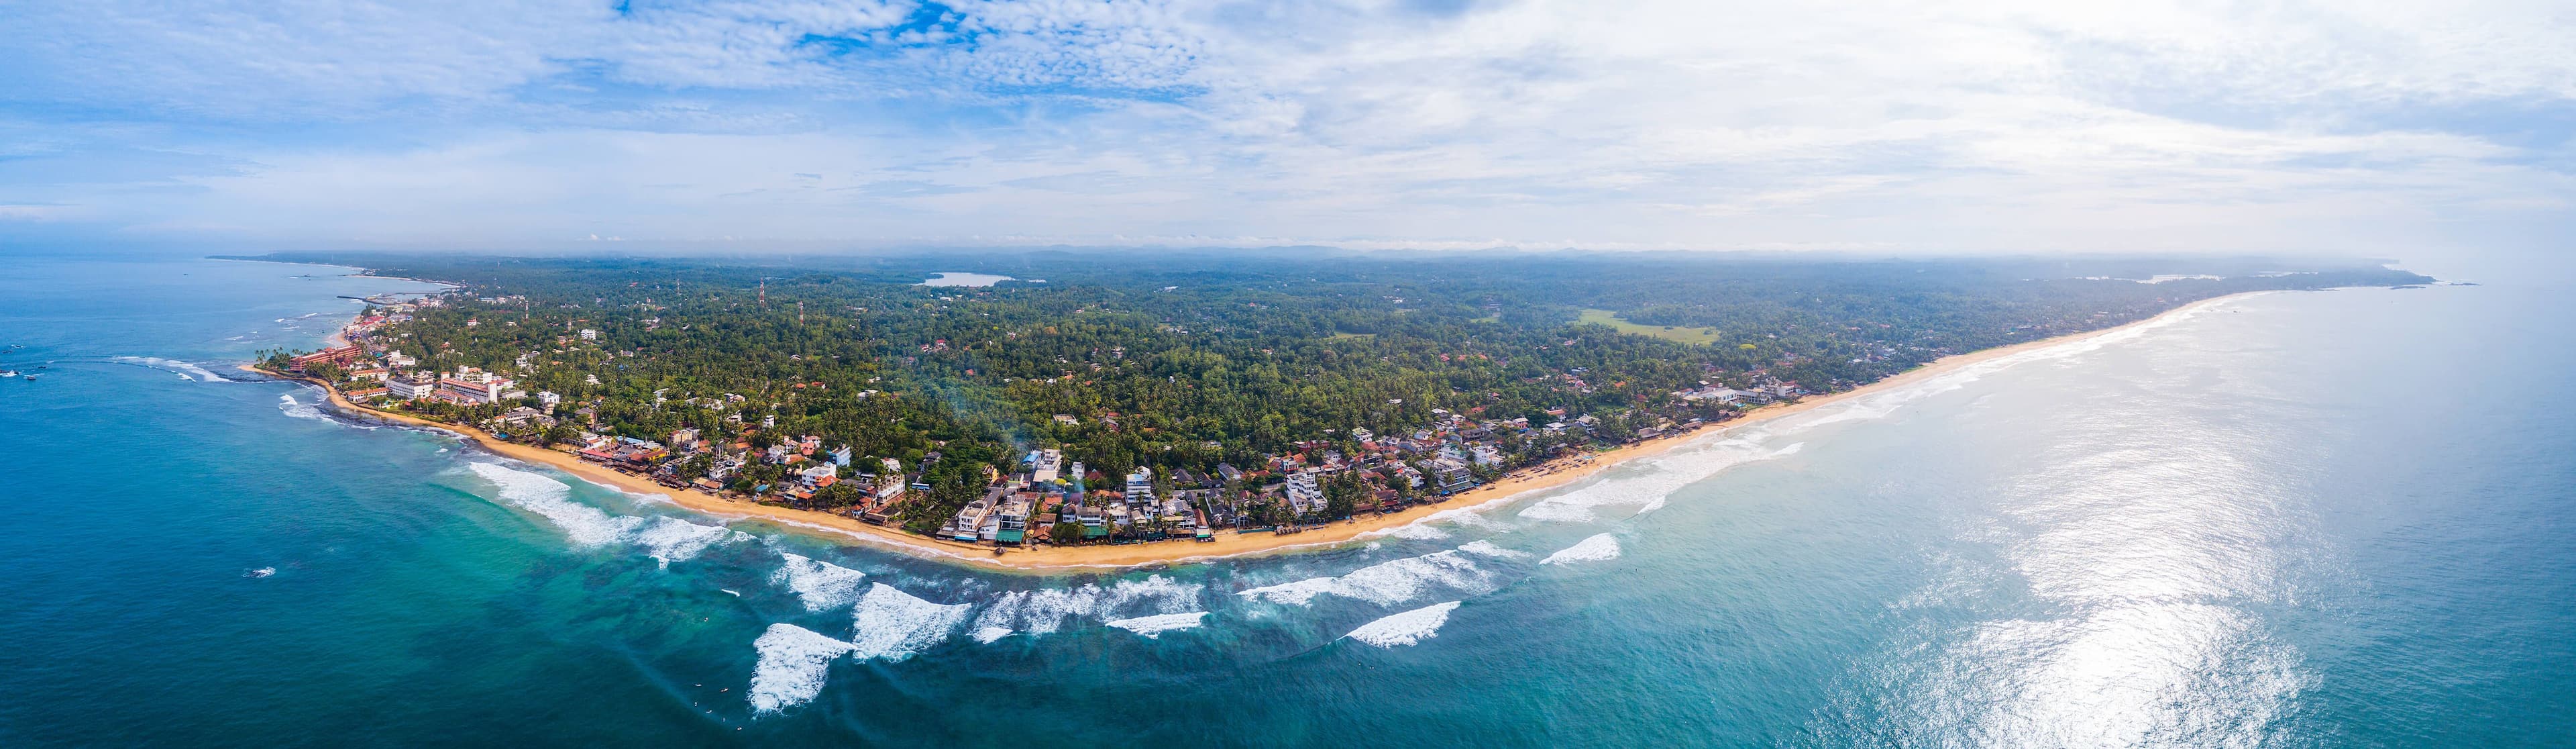 Aerial view of the town of Hikkaduwa with its beaches, Sri Lanka.